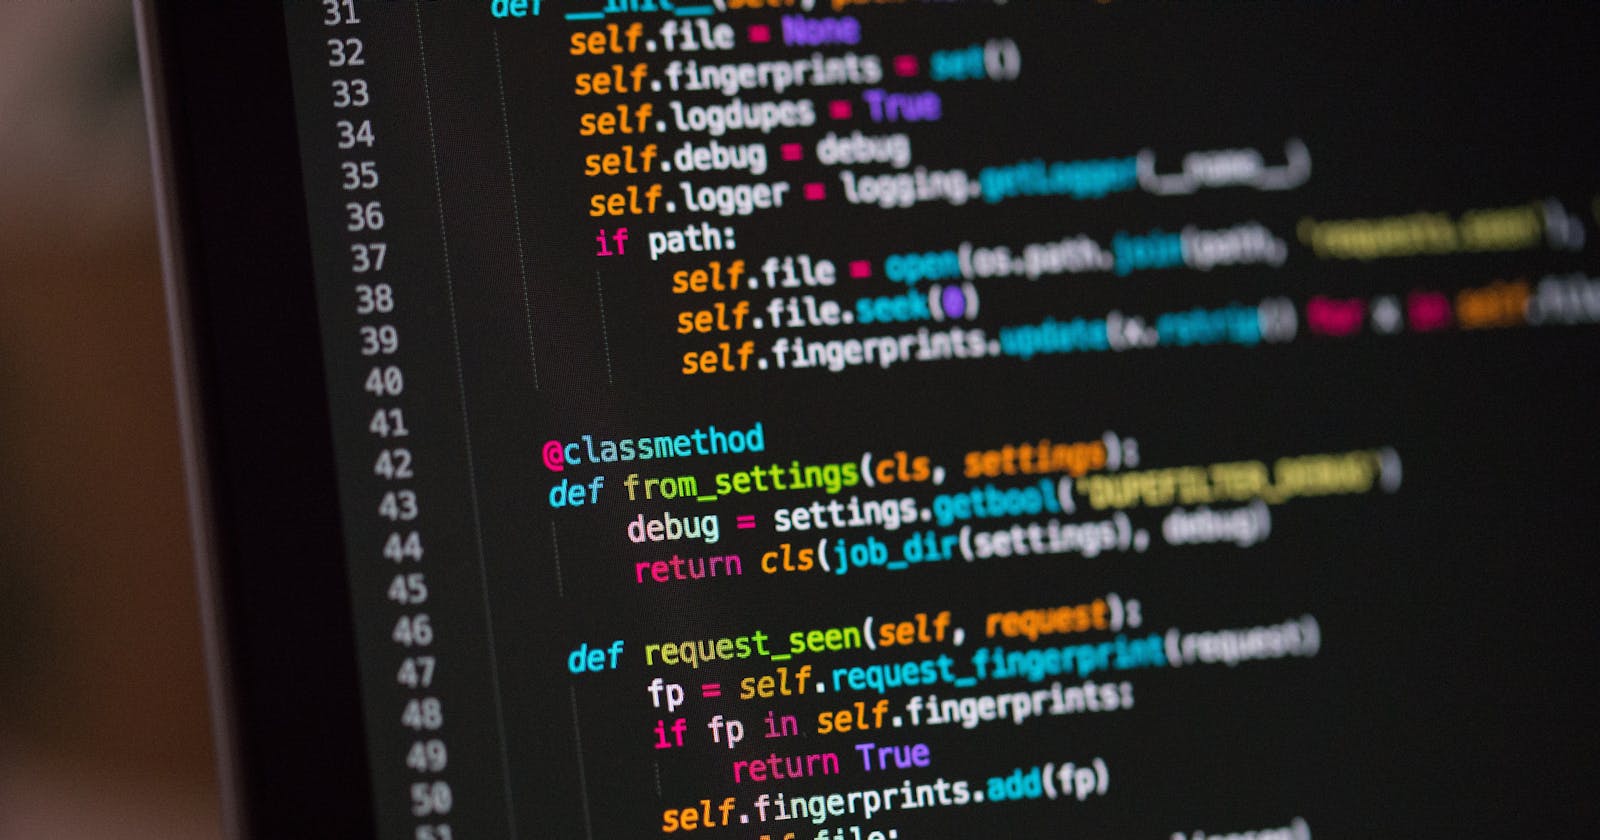 Hard-Coding: What Does It Mean? and Is It a Bad Practice?